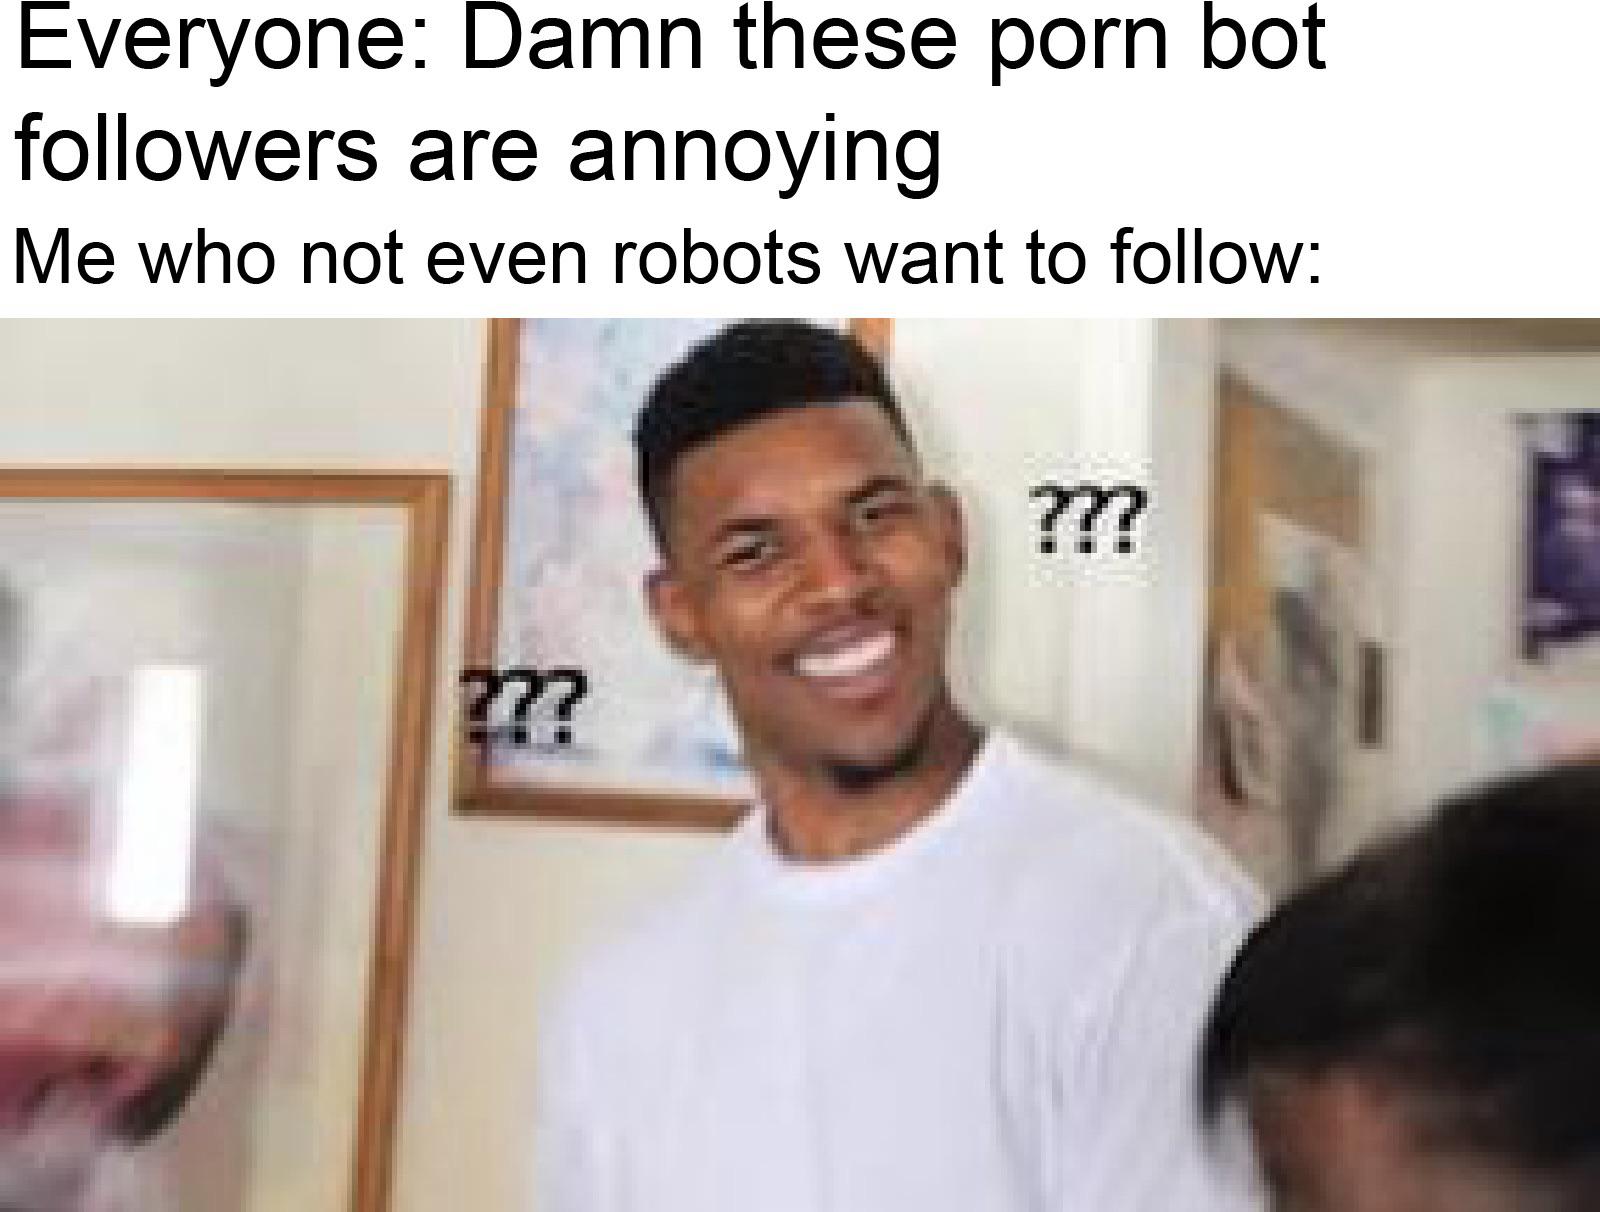 funny memes and pics - guy confused memes - Everyone Damn these porn bot ers are annoying Me who not even robots want to 77? ????